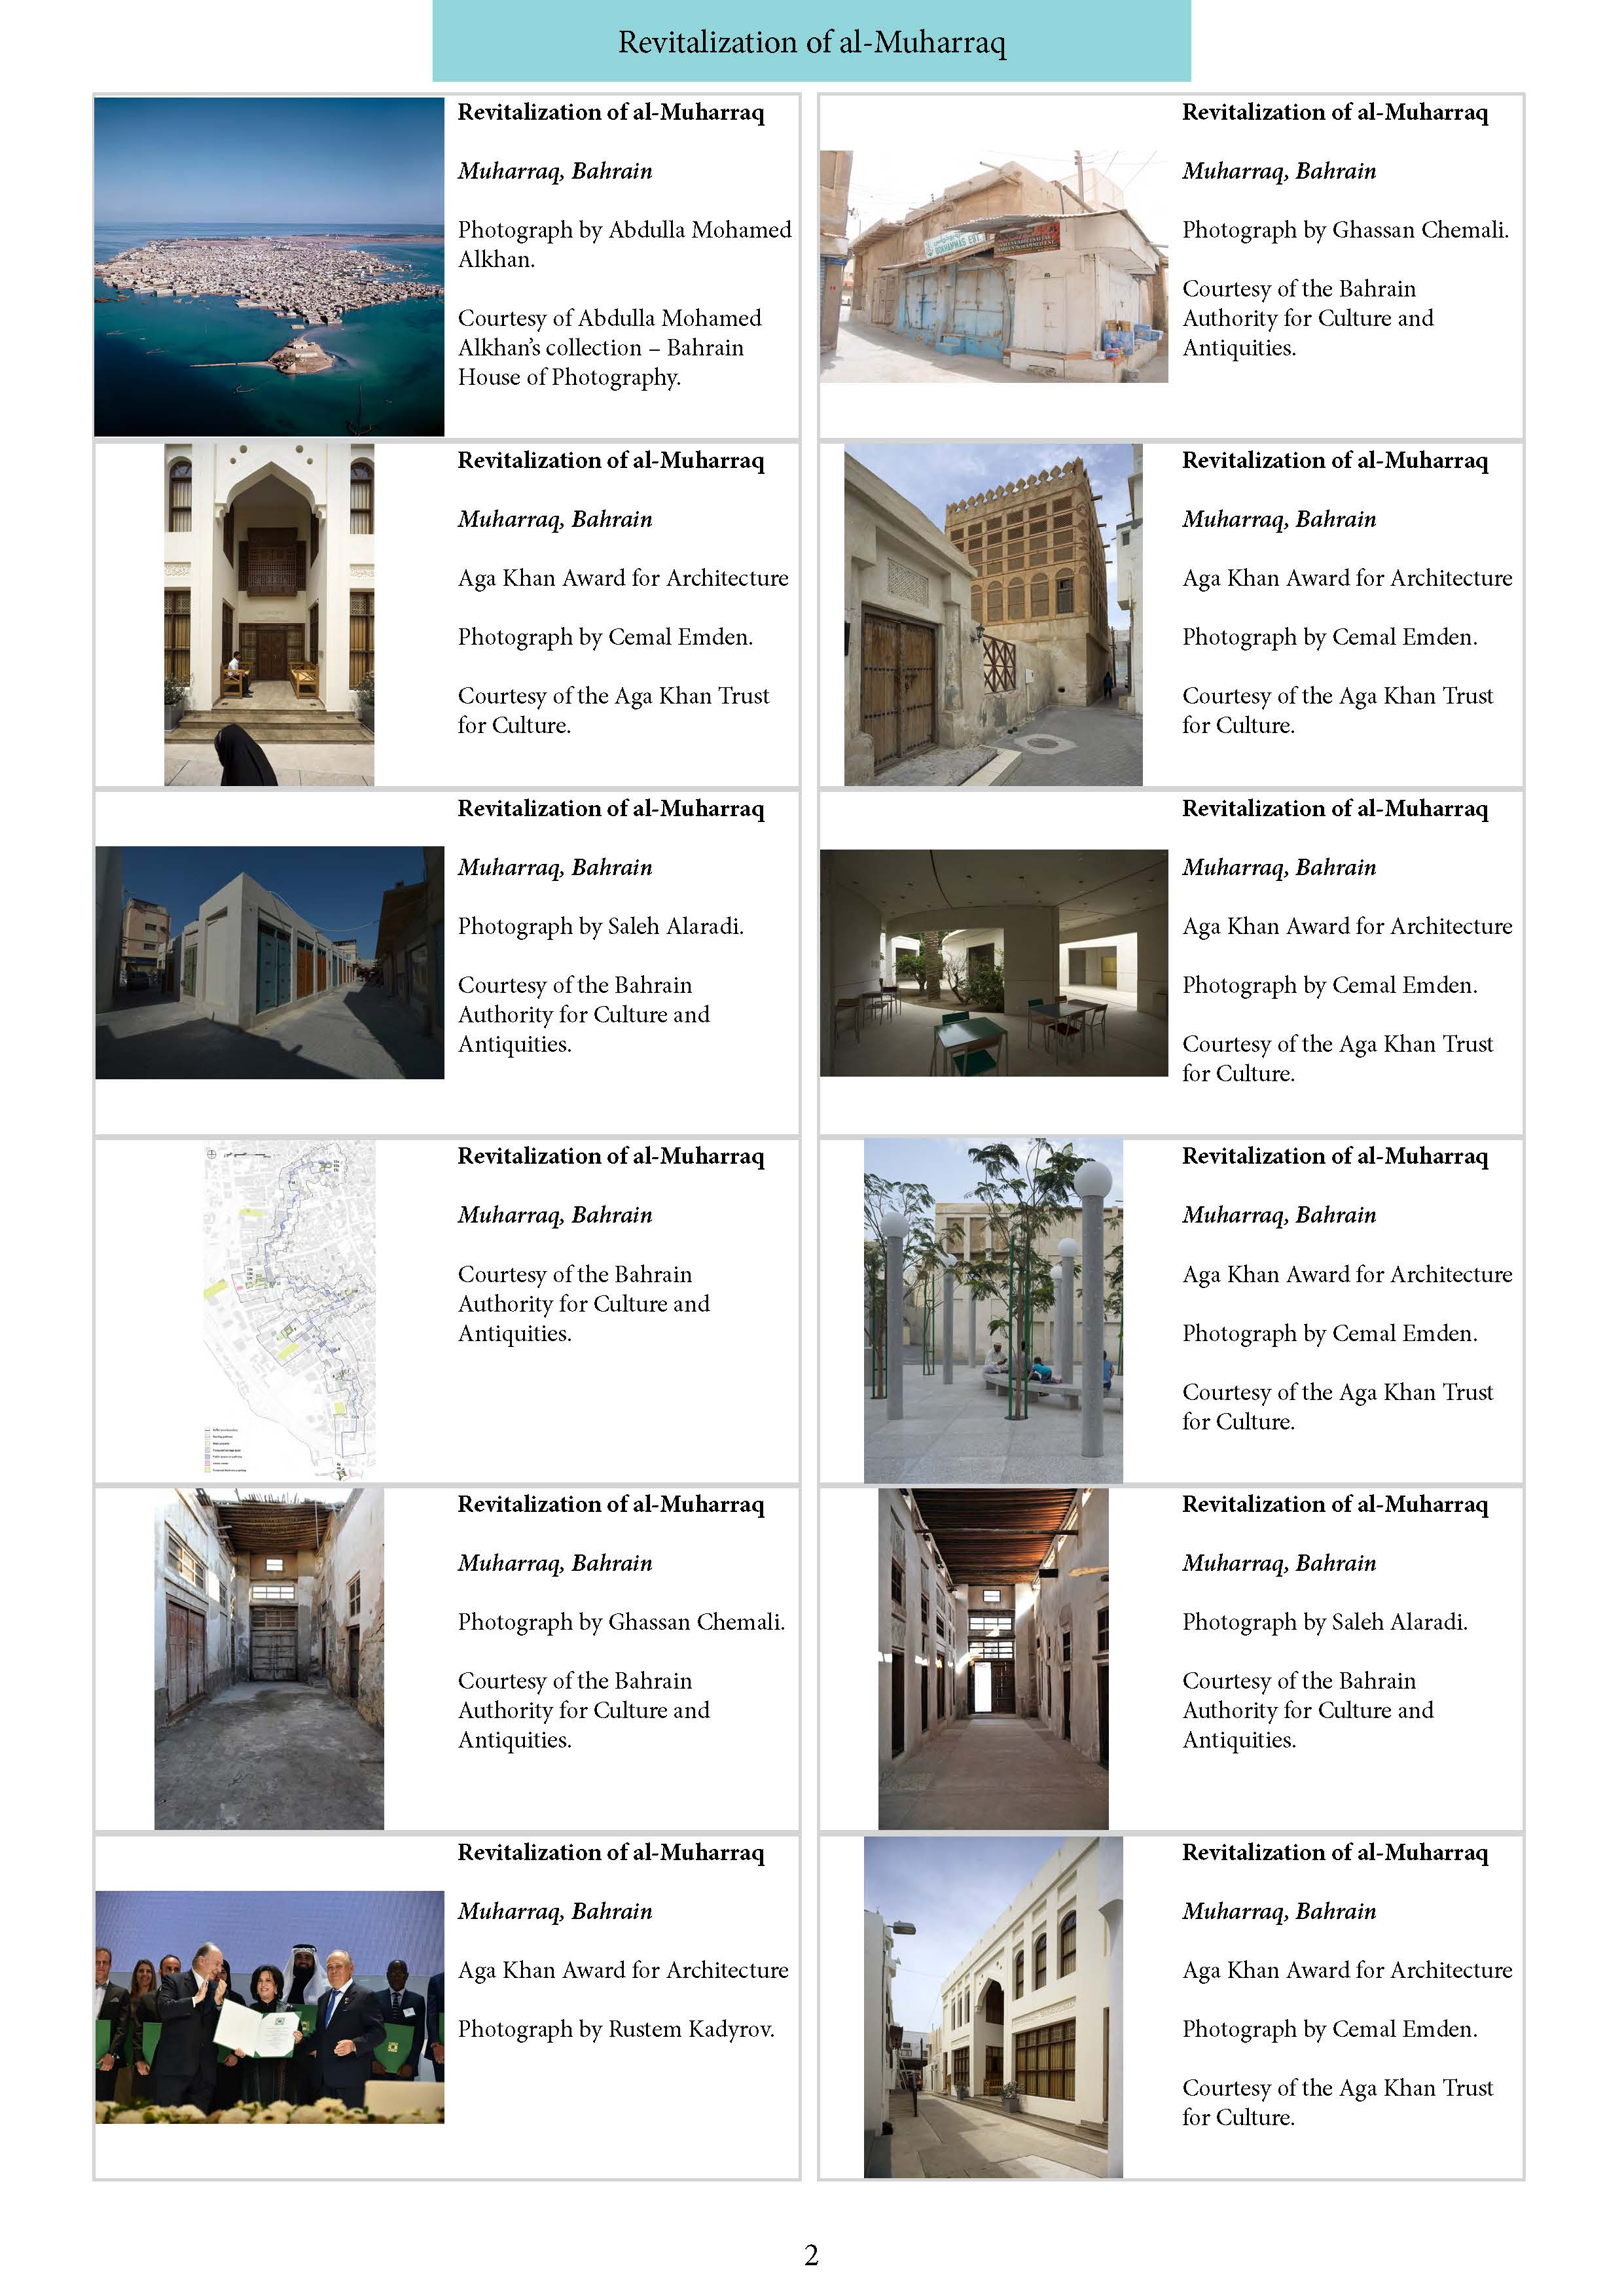 Image Credits Catalogue. Clients and Designers: Models of Patronage in the Built Environment